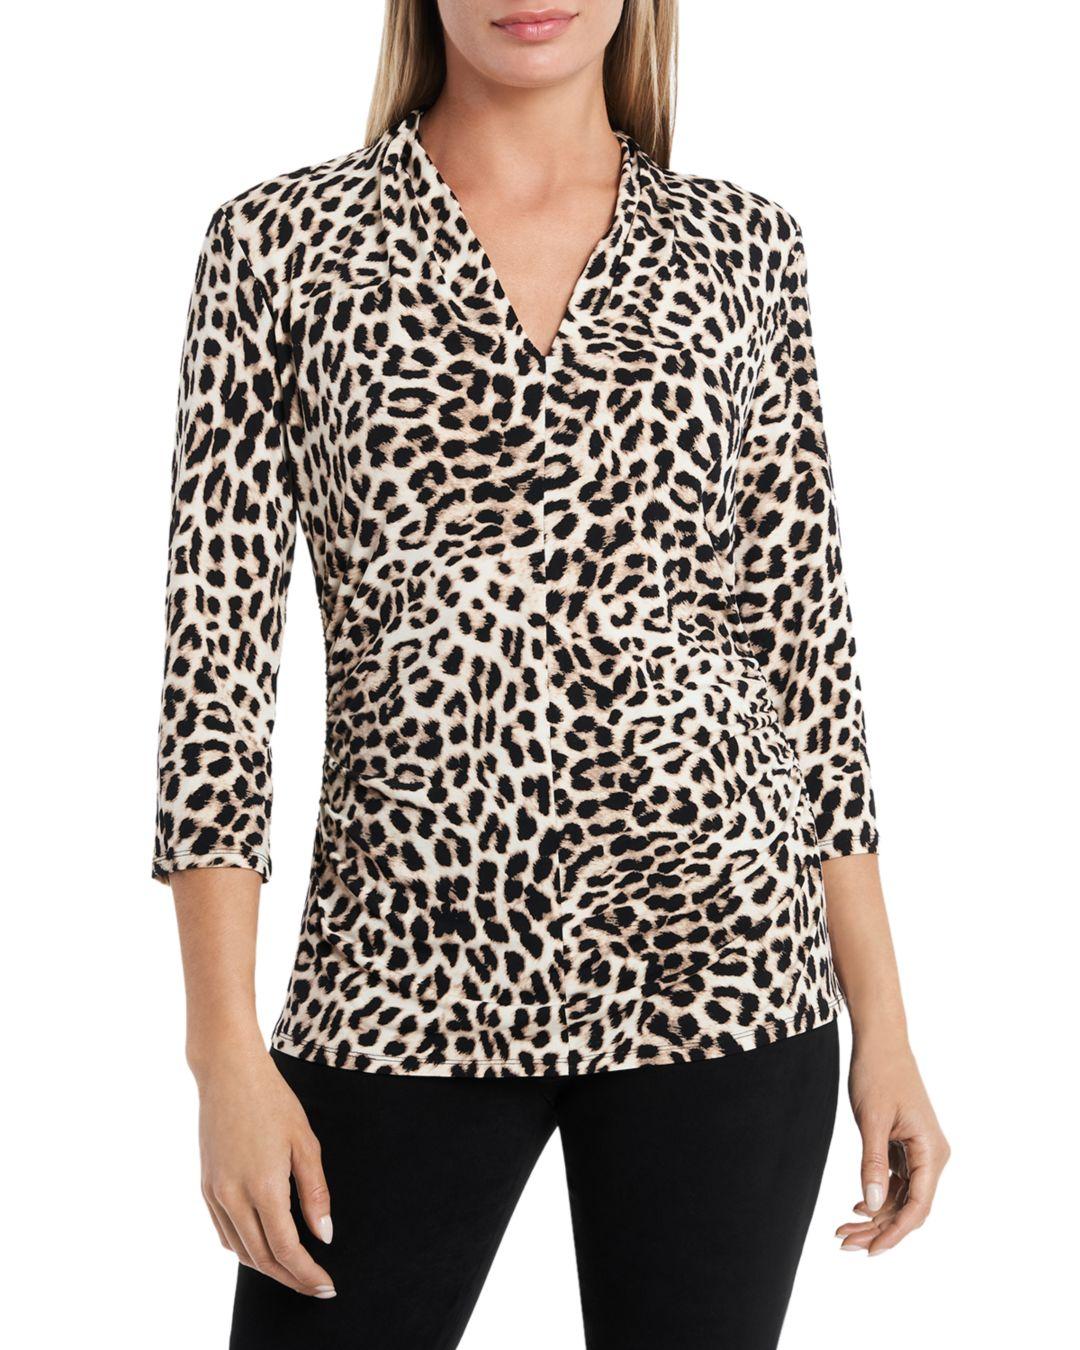 Vince Camuto Synthetic Leopard Print Top in Black - Lyst